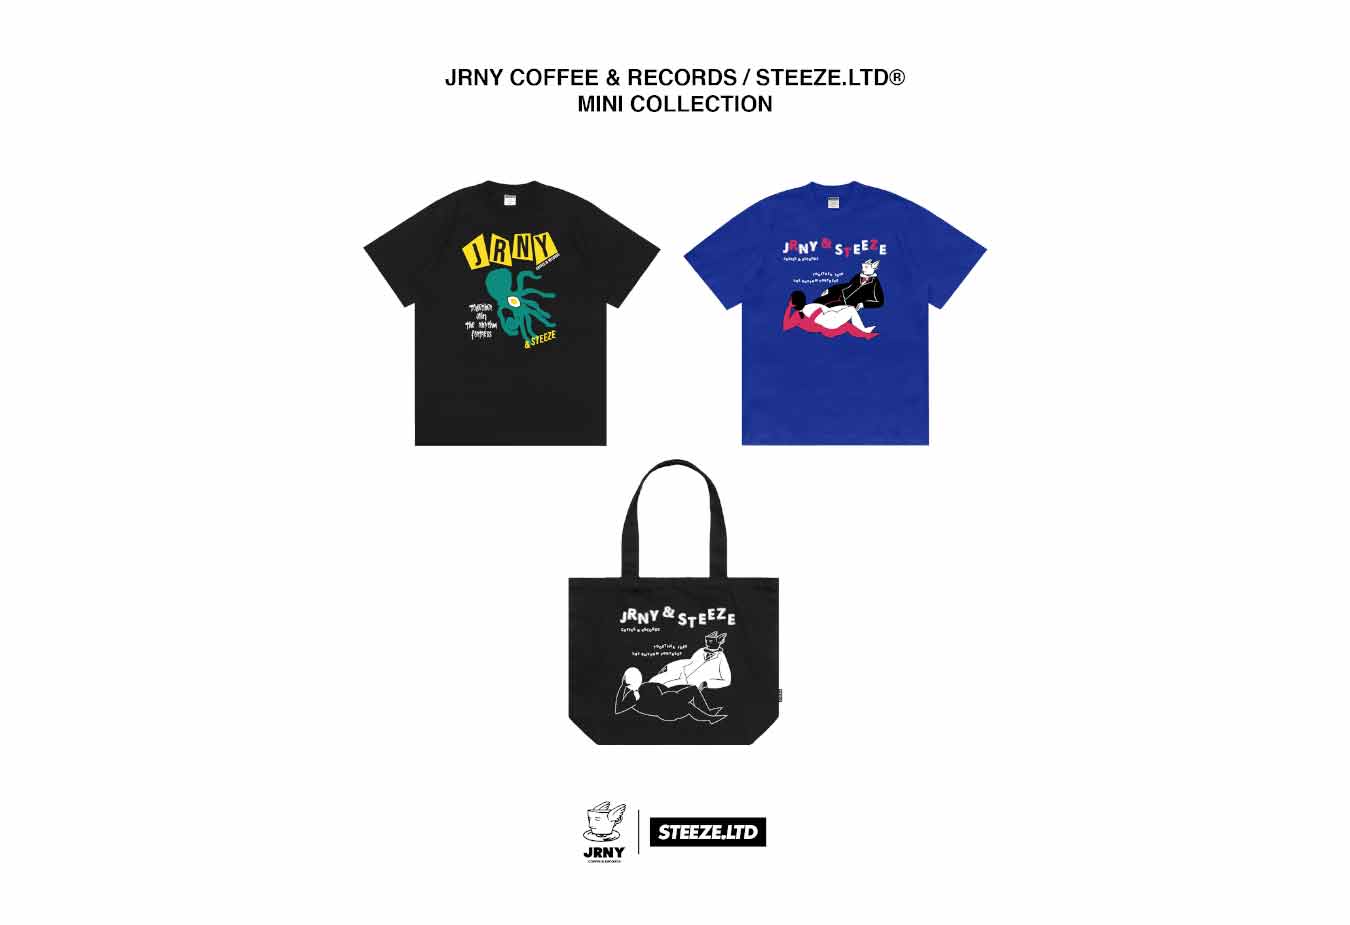 JRNY Coffee & Records x Steeze.ltd Releases a Mini Capsule Collection